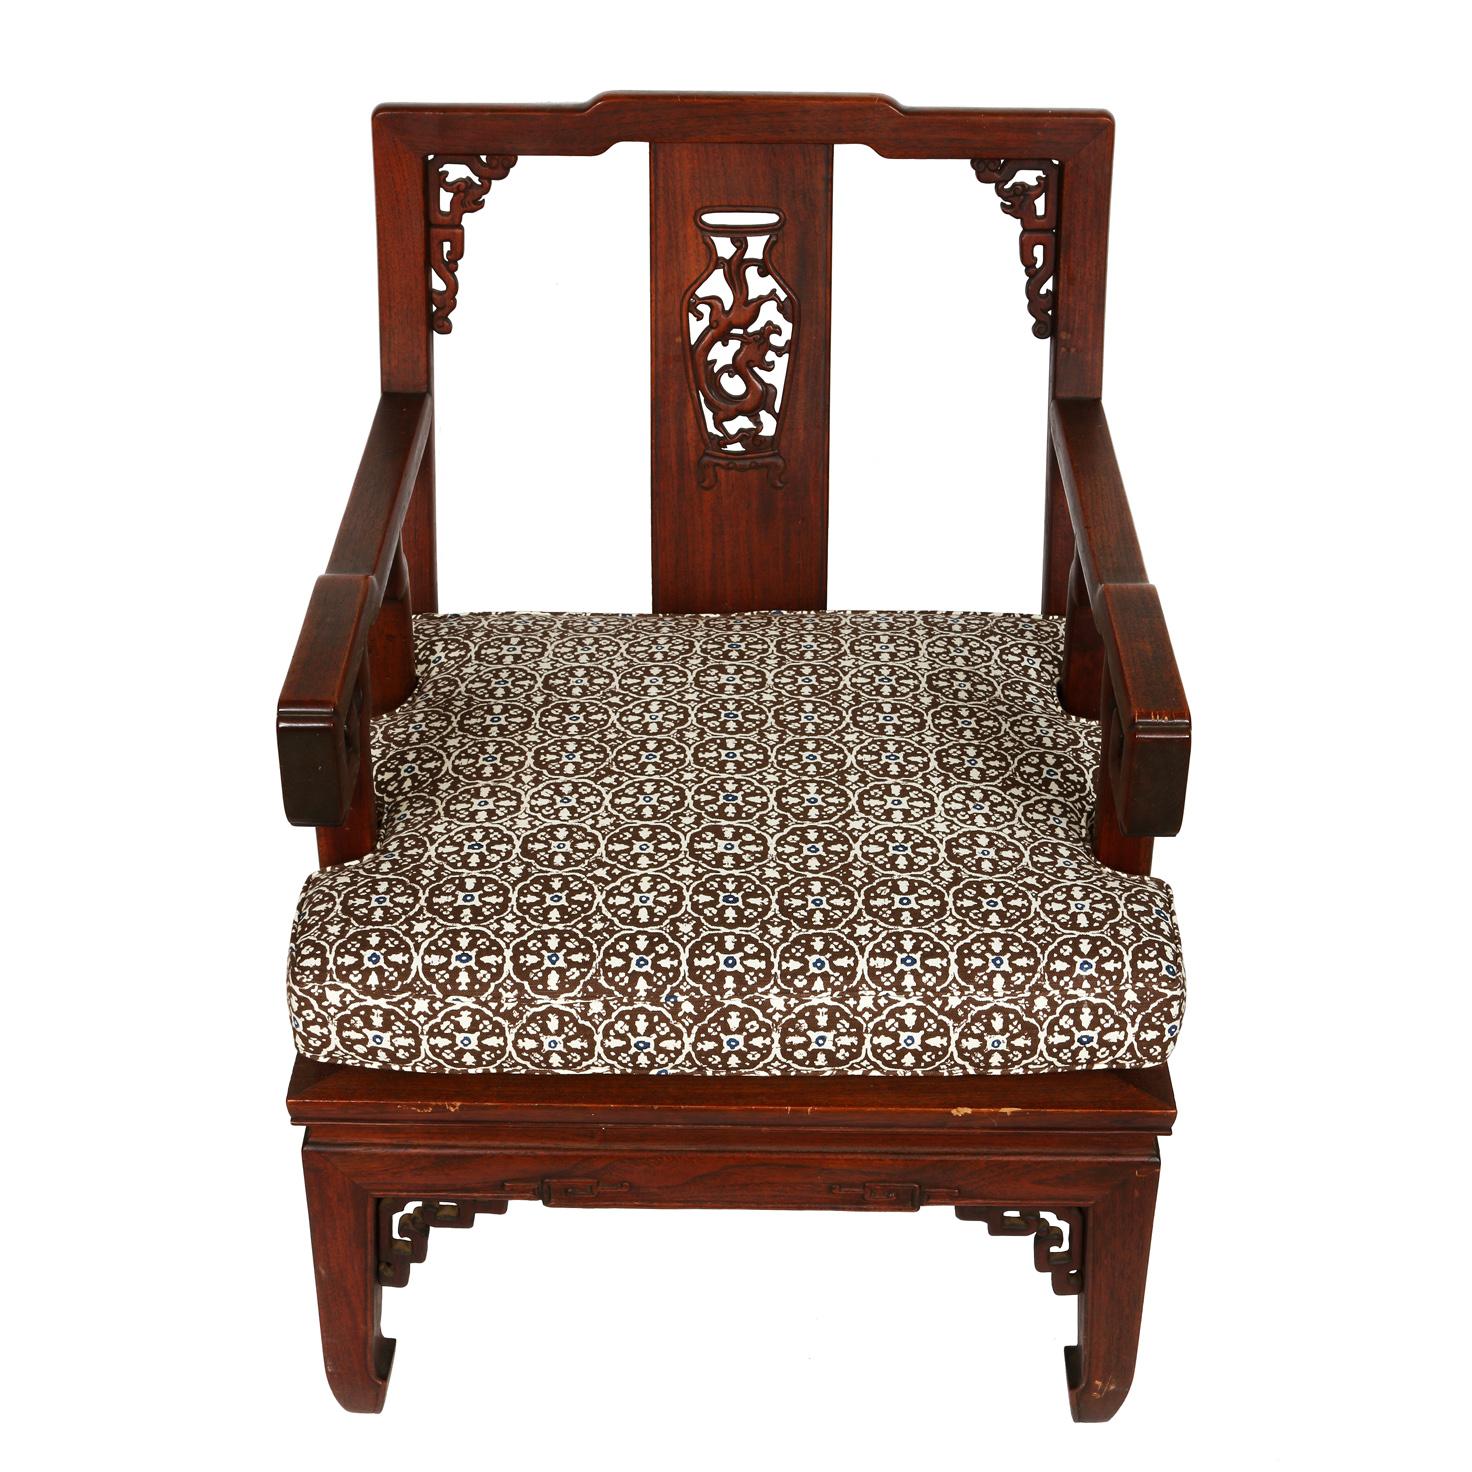 A pair of Asian carved hardwood chairs in square shape with newly upholstered tailored cushions.